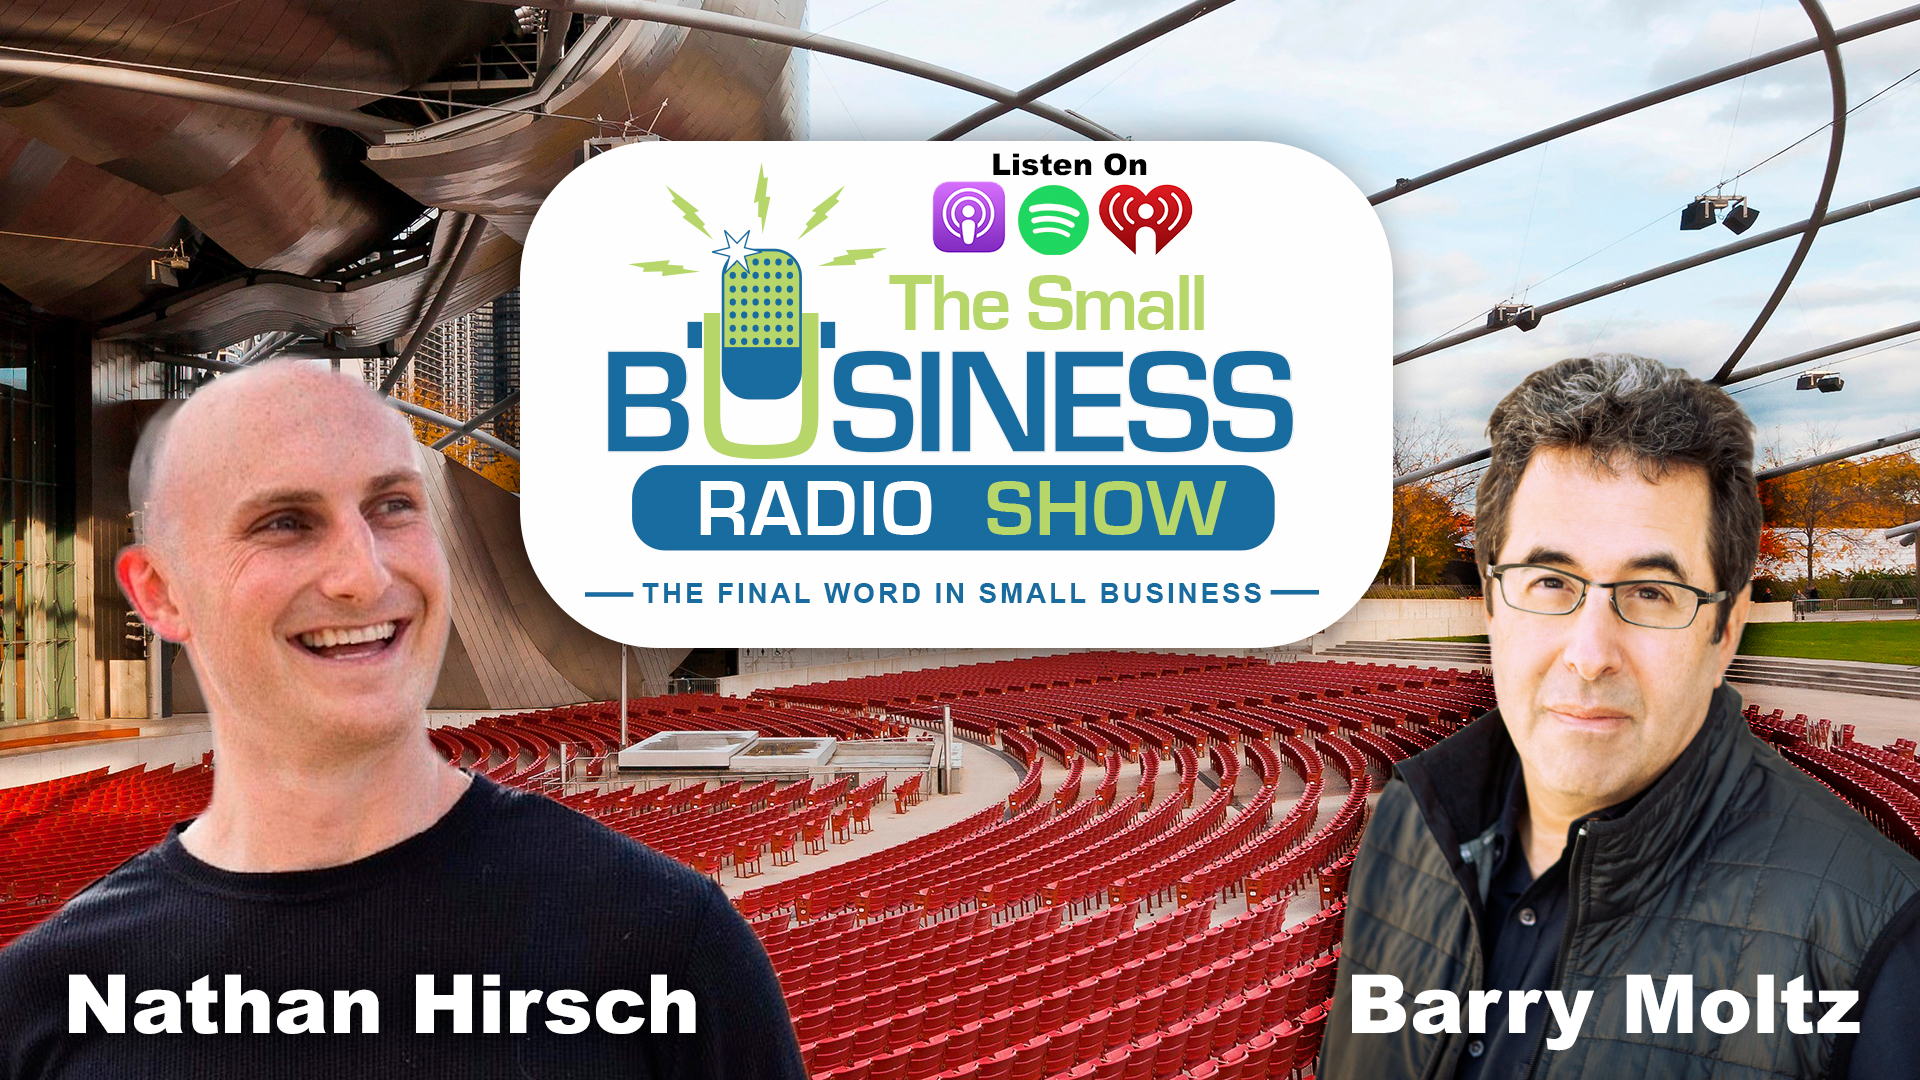 Nathan Hirsch on The Small Business Radio Show